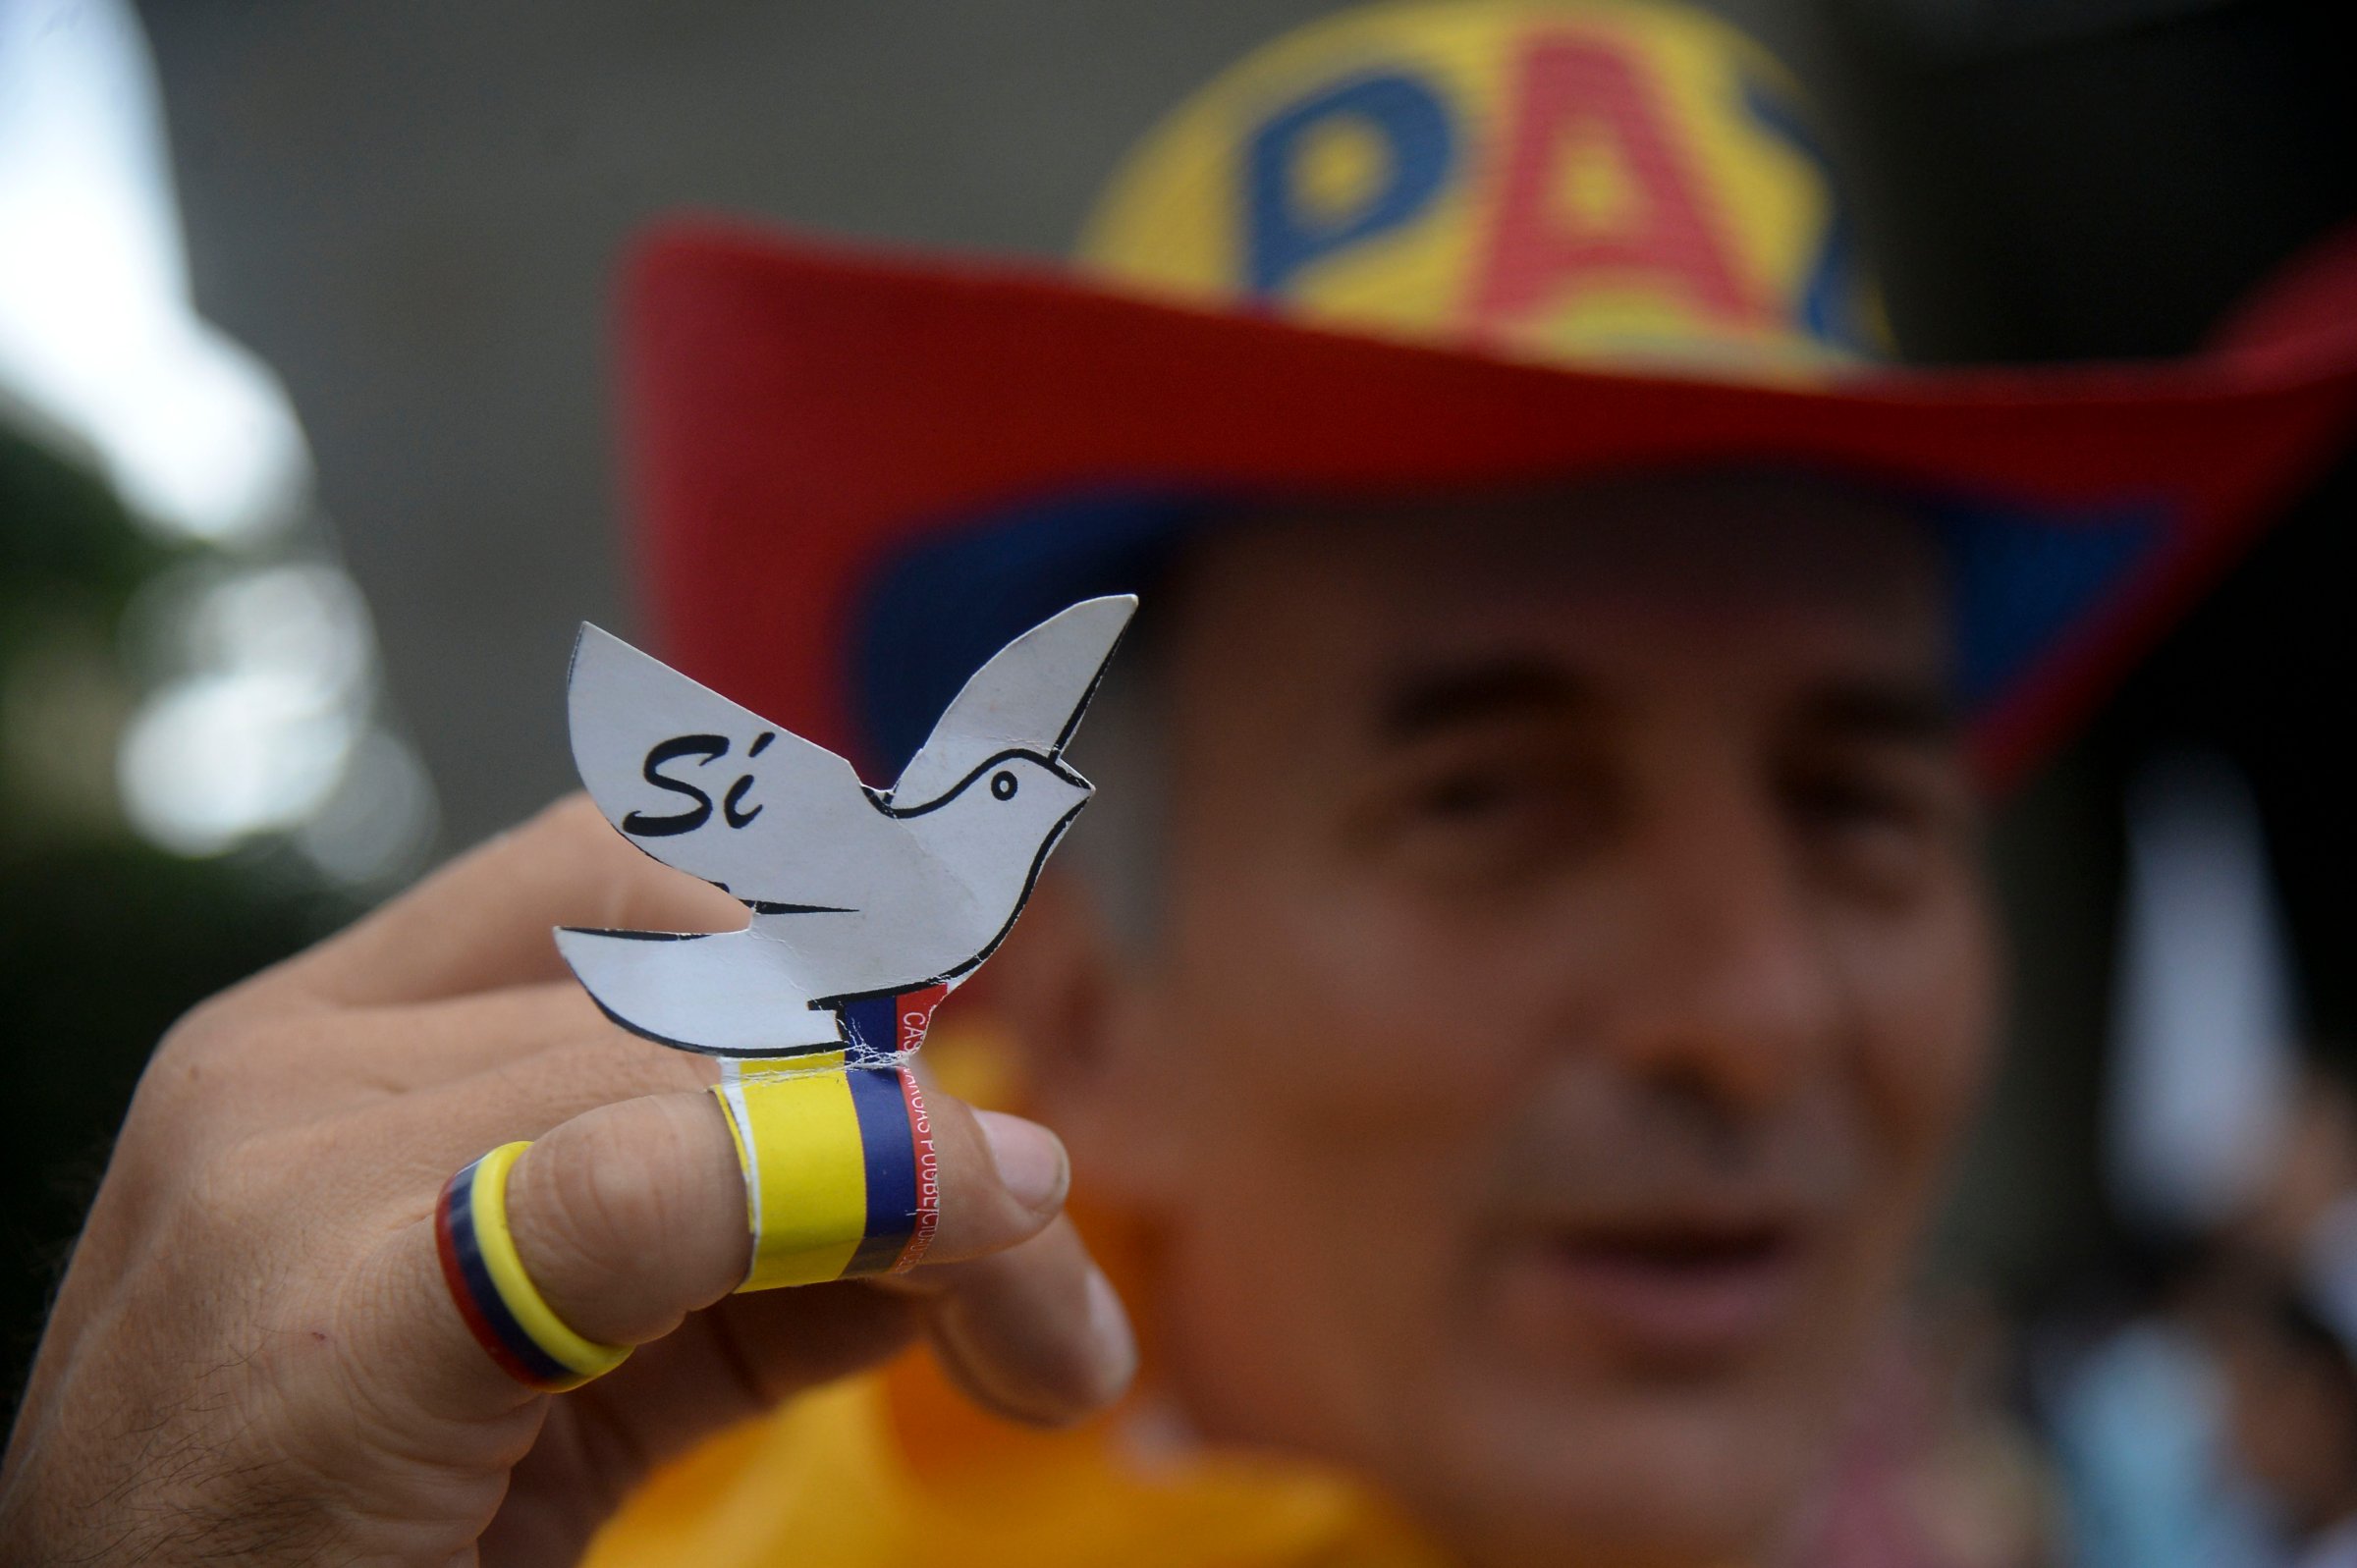 Picture taken during a march for peace through the streets of Medellin, Colombia, on October 7, 2016 just days after voters shot down a historic peace accord between the government and the Revolutionary Armed Forces of Colombia (FARC) to end the war.